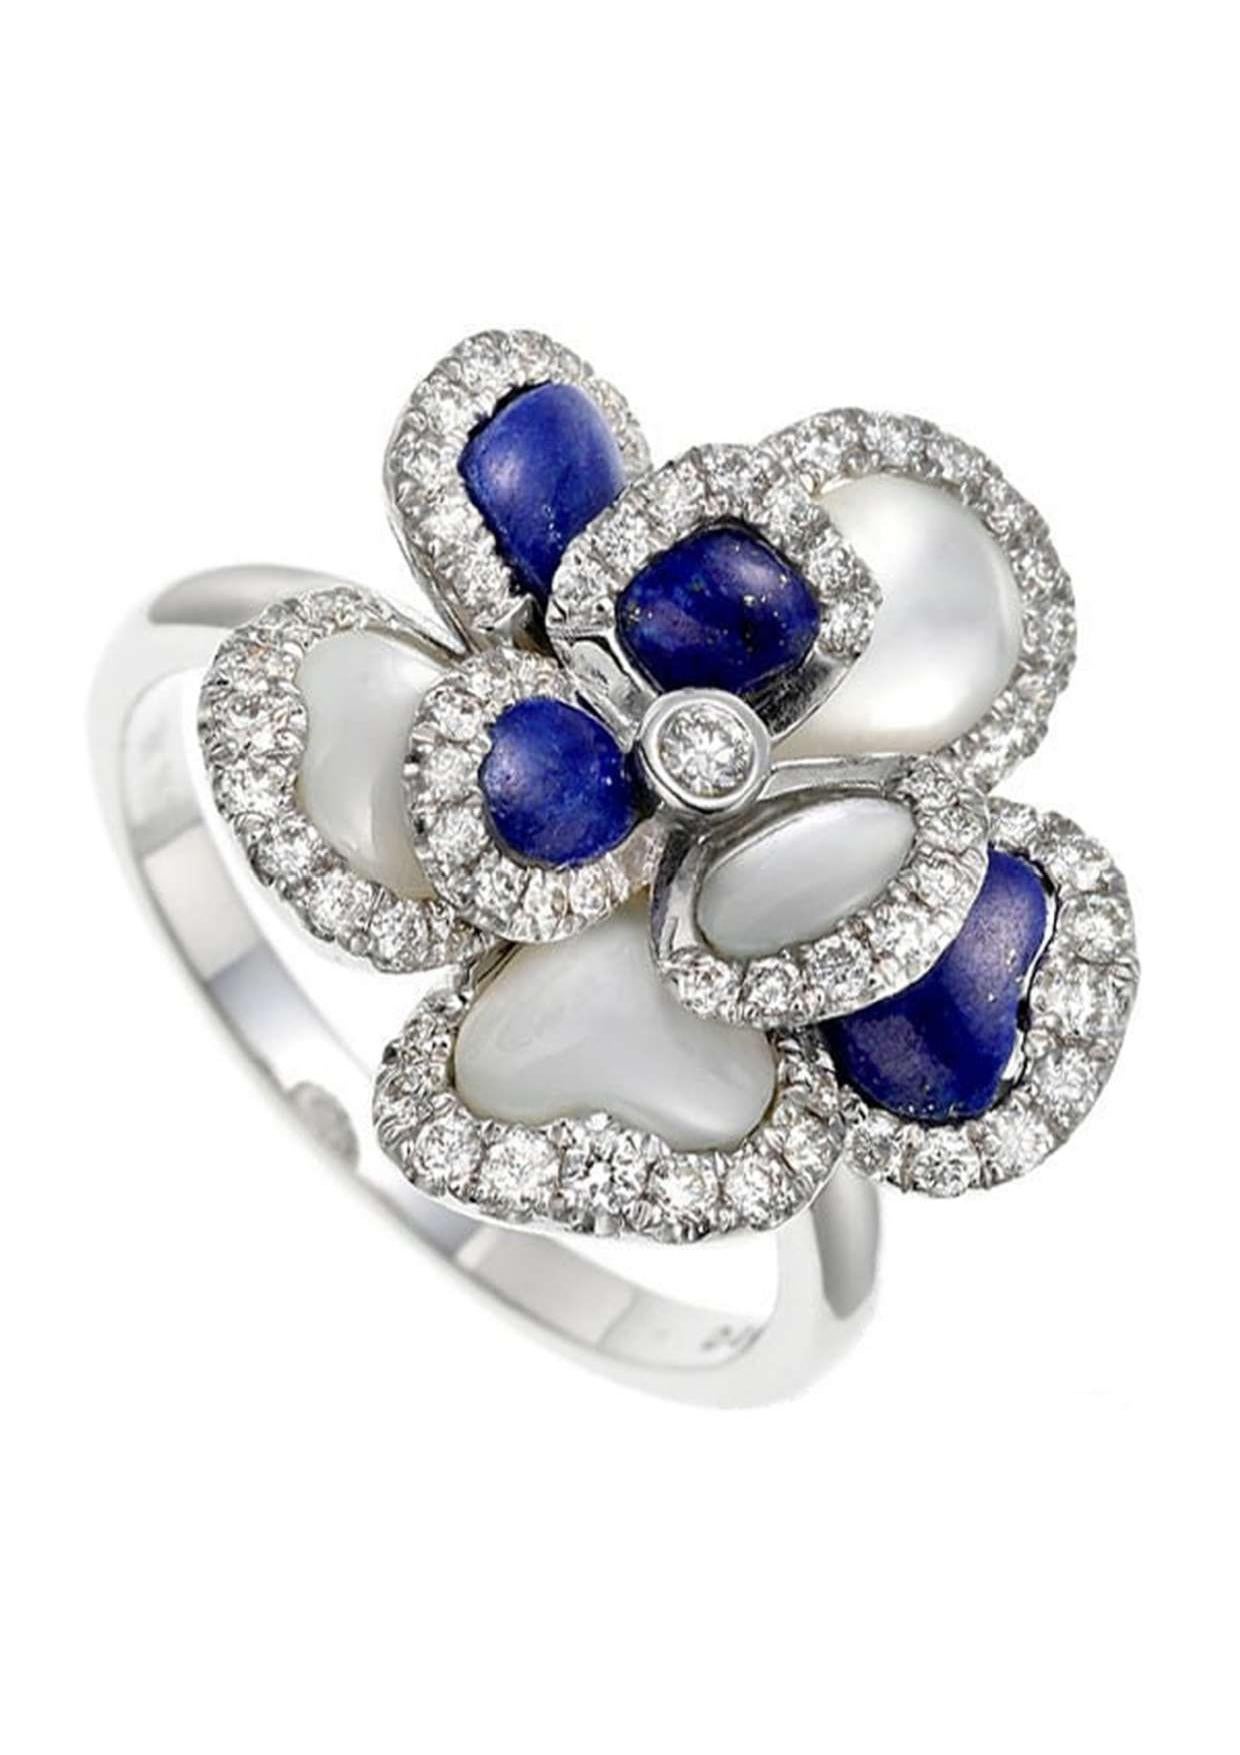 Elevate your style with this exquisite lapis lazuli mother-of-pearl diamond ring crafted in 18K white gold. A true statement piece, this ring features a mesmerizing lapis lazuli stone accented by shimmering diamonds and lustrous mother-of-pearl,